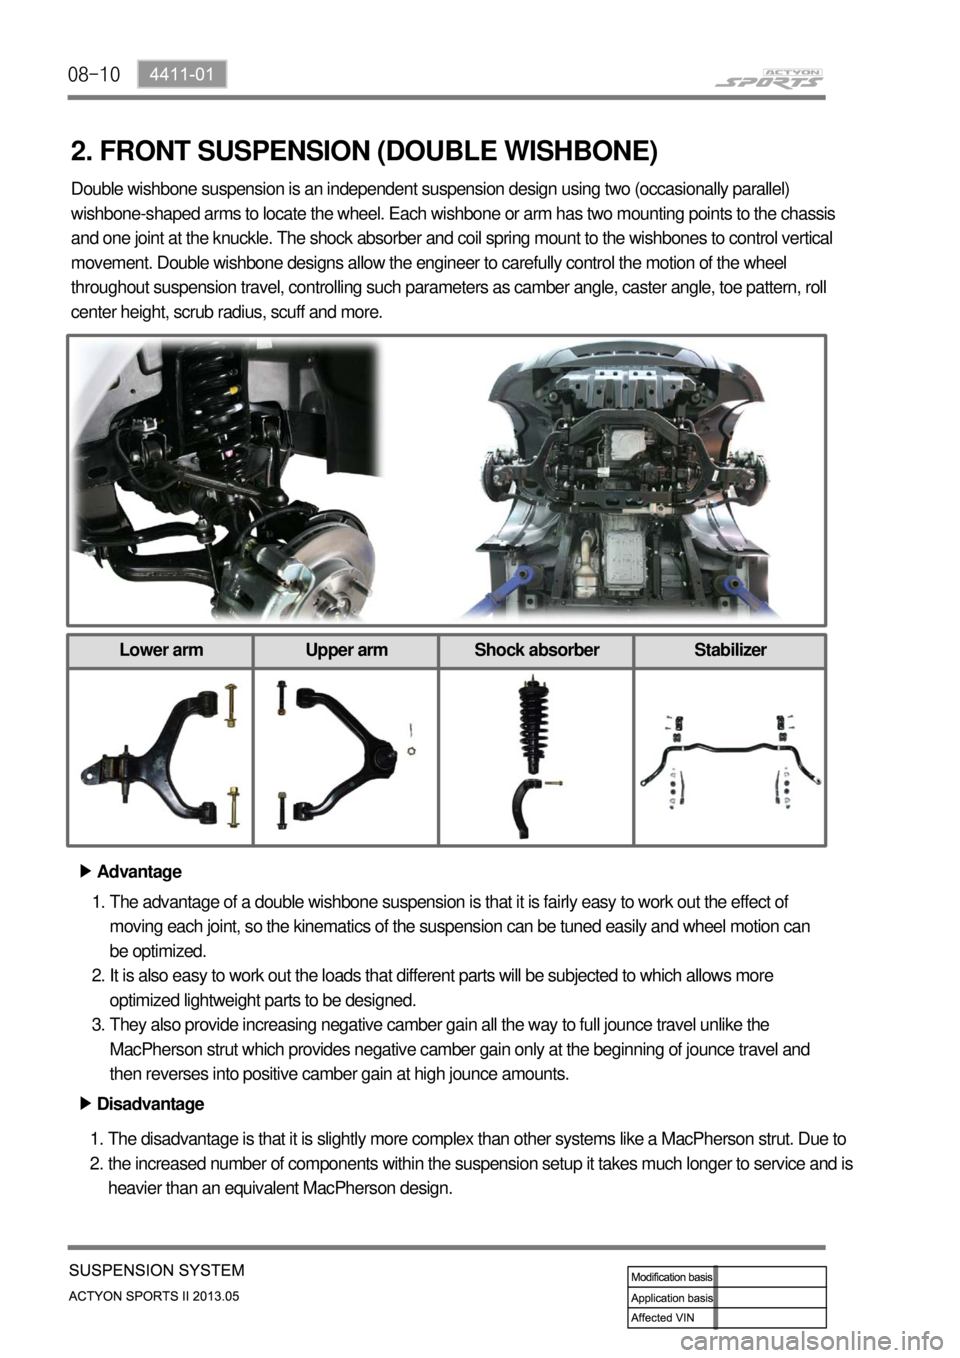 SSANGYONG NEW ACTYON SPORTS 2013  Service Manual 08-10
2. FRONT SUSPENSION (DOUBLE WISHBONE)
Advantage ▶
The advantage of a double wishbone suspension is that it is fairly easy to work out the effect of 
moving each joint, so the kinematics of the